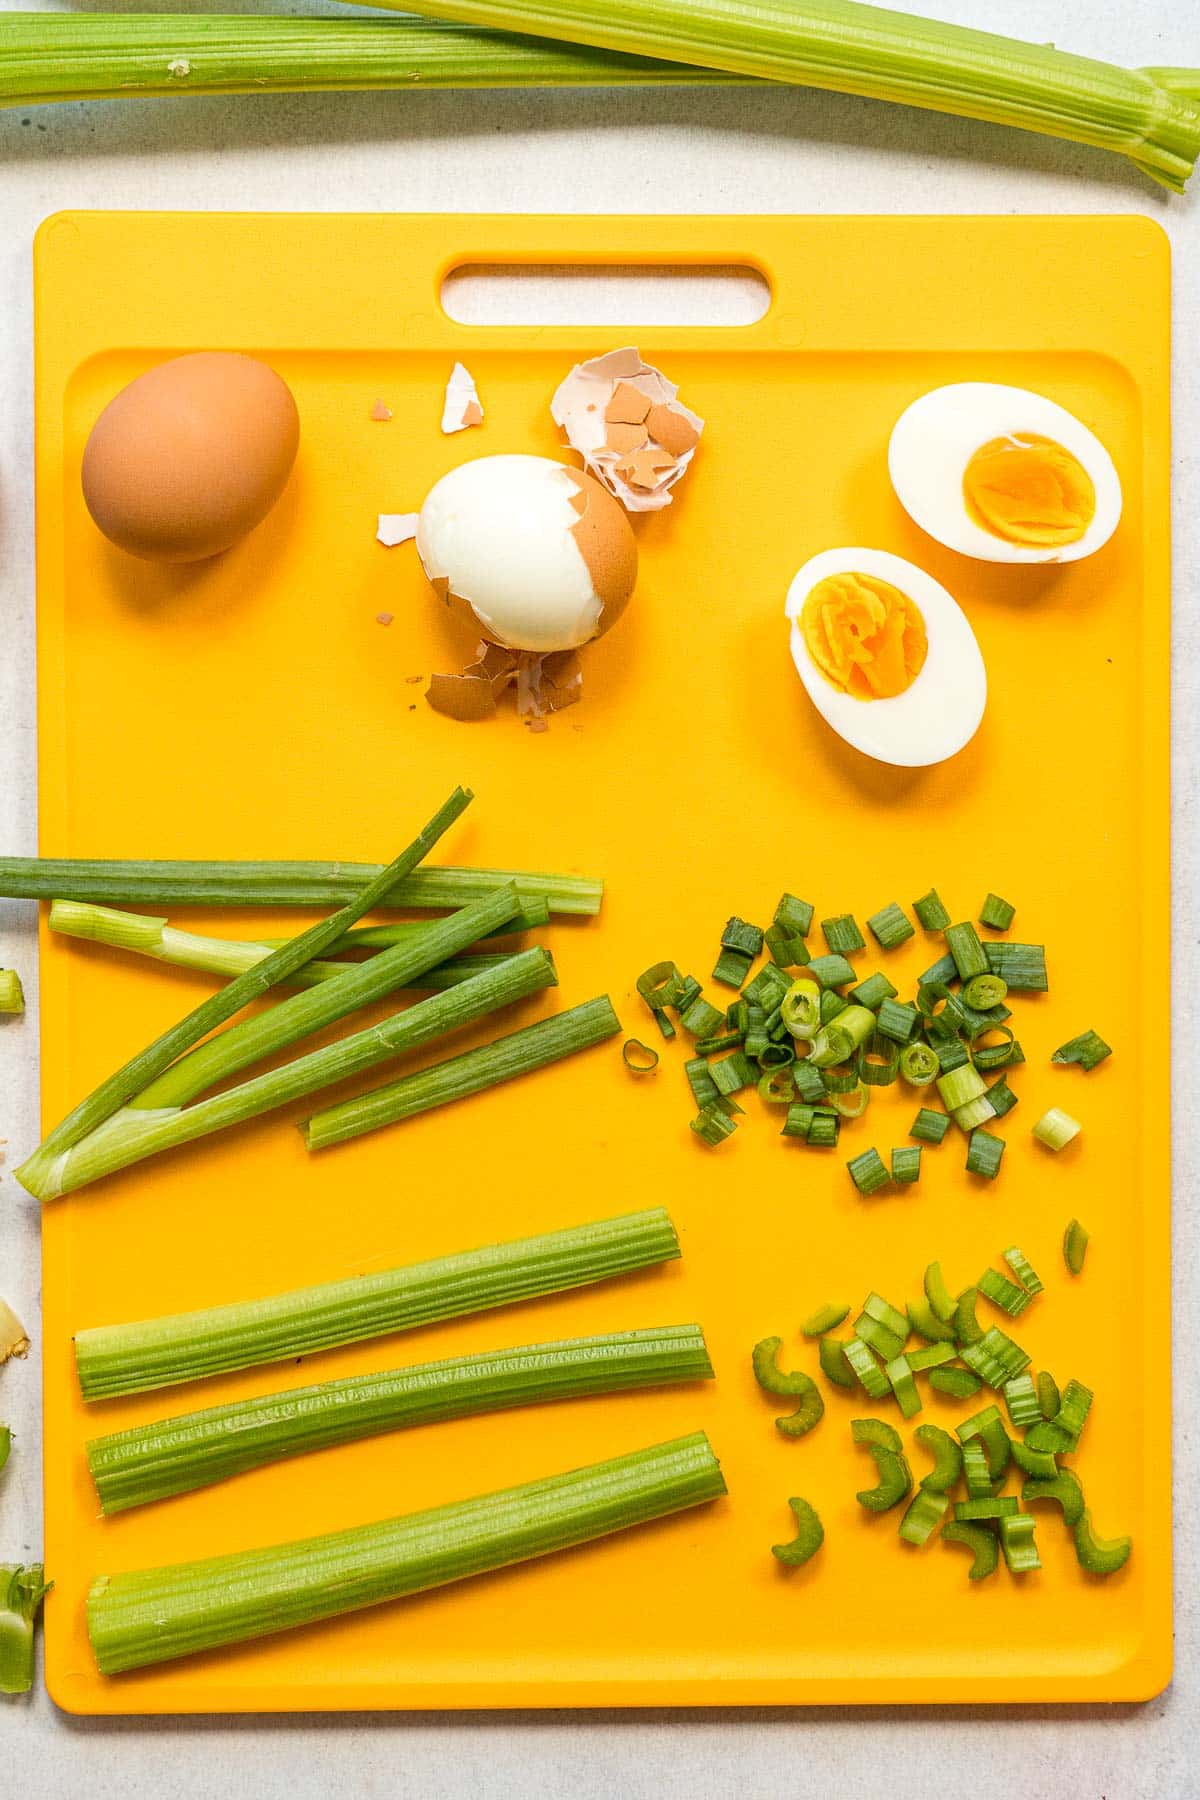 Chopped hard boiled eggs and vegetables on a yellow cutting board